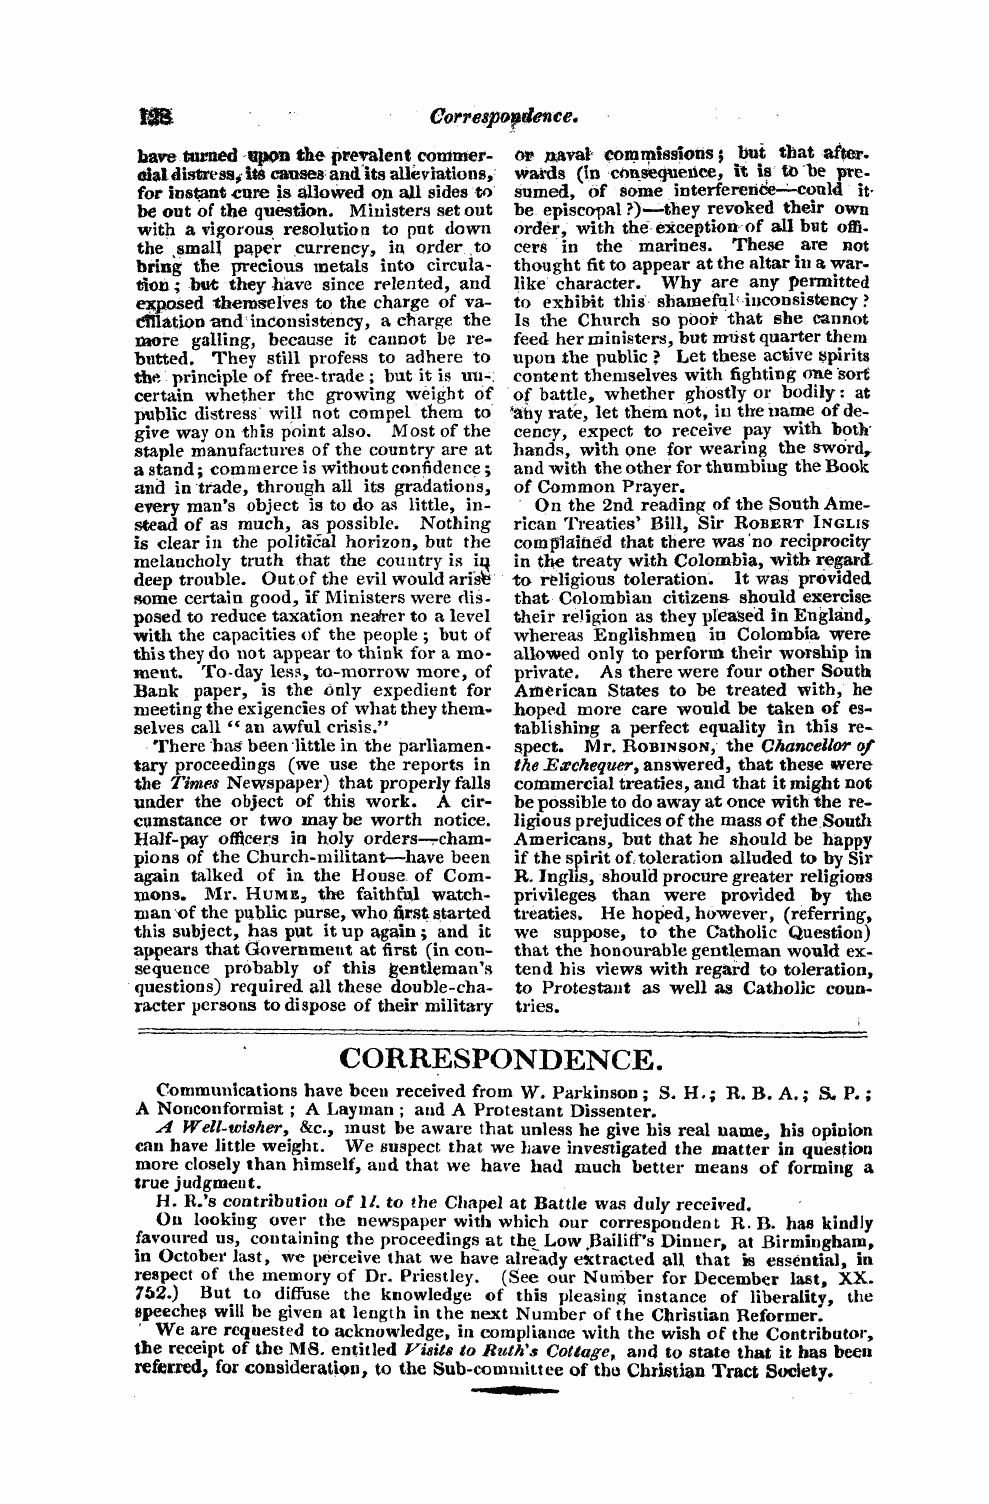 Monthly Repository (1806-1838) and Unitarian Chronicle (1832-1833): F Y, 1st edition - Correspondence.